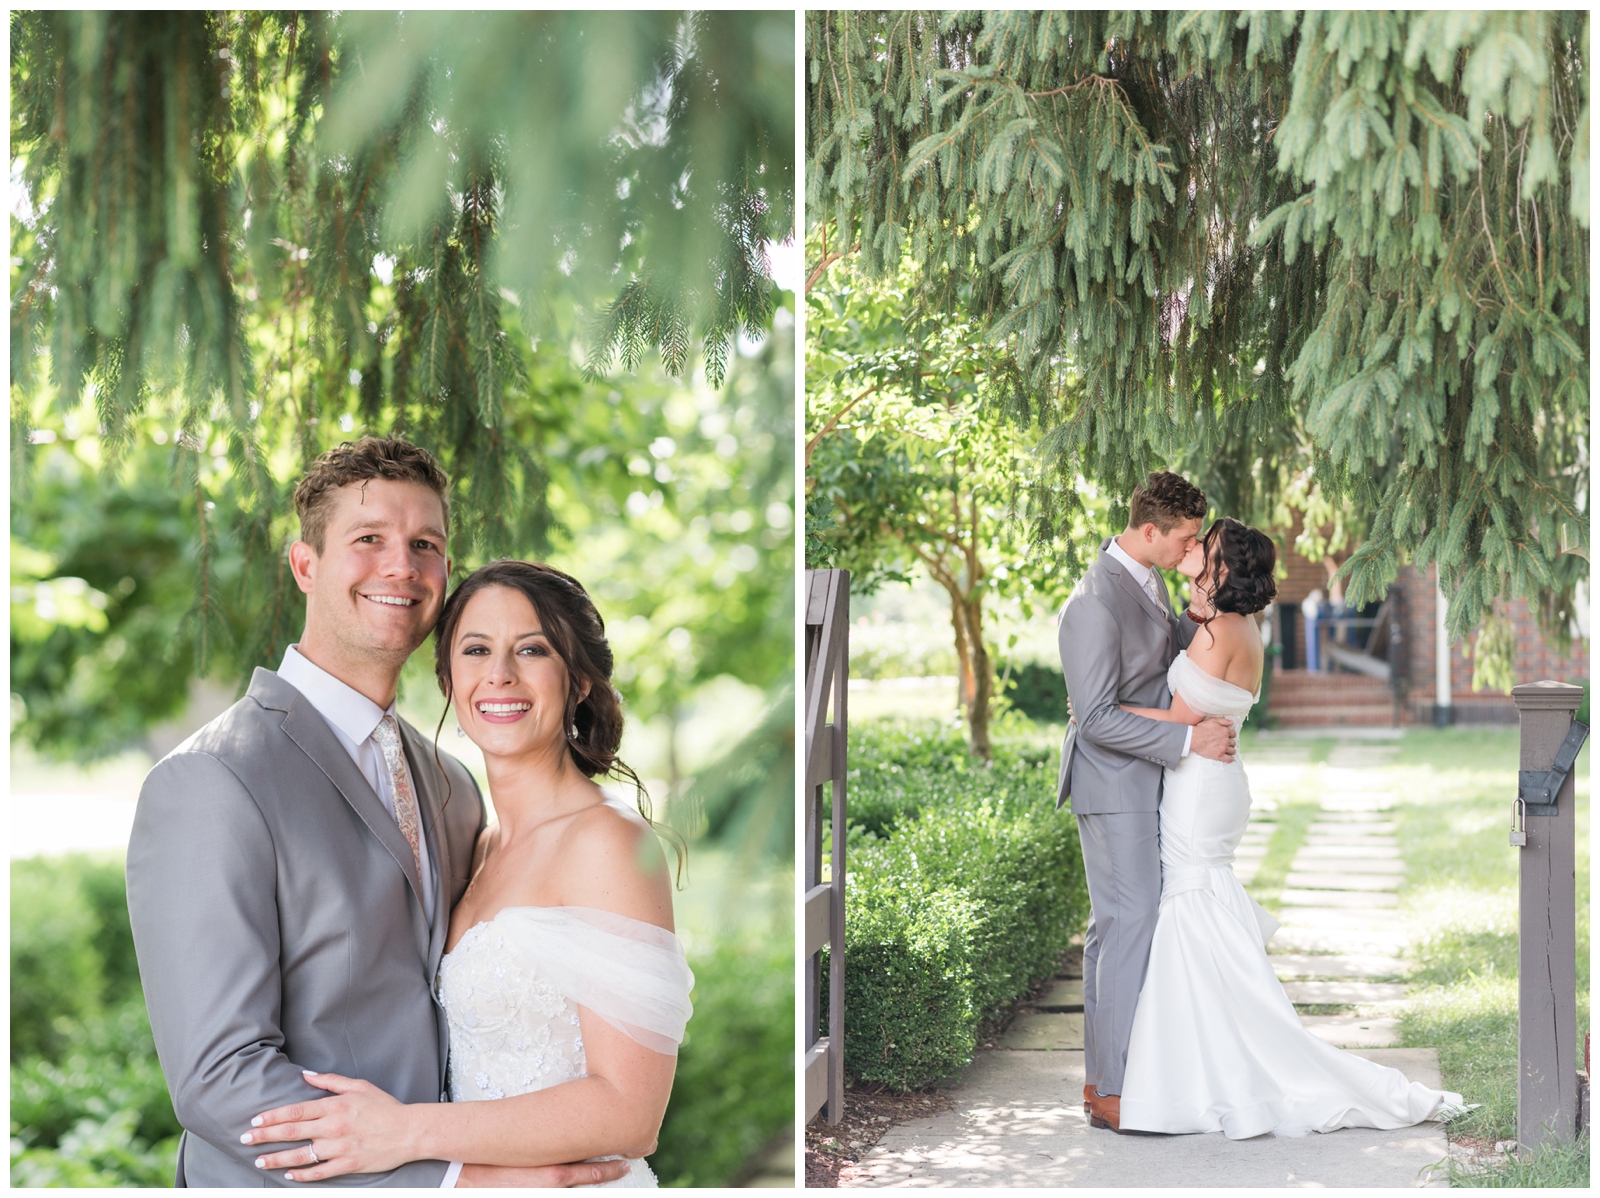 bride and groom kiss under trees along walkway at Franklin Park Conservatory